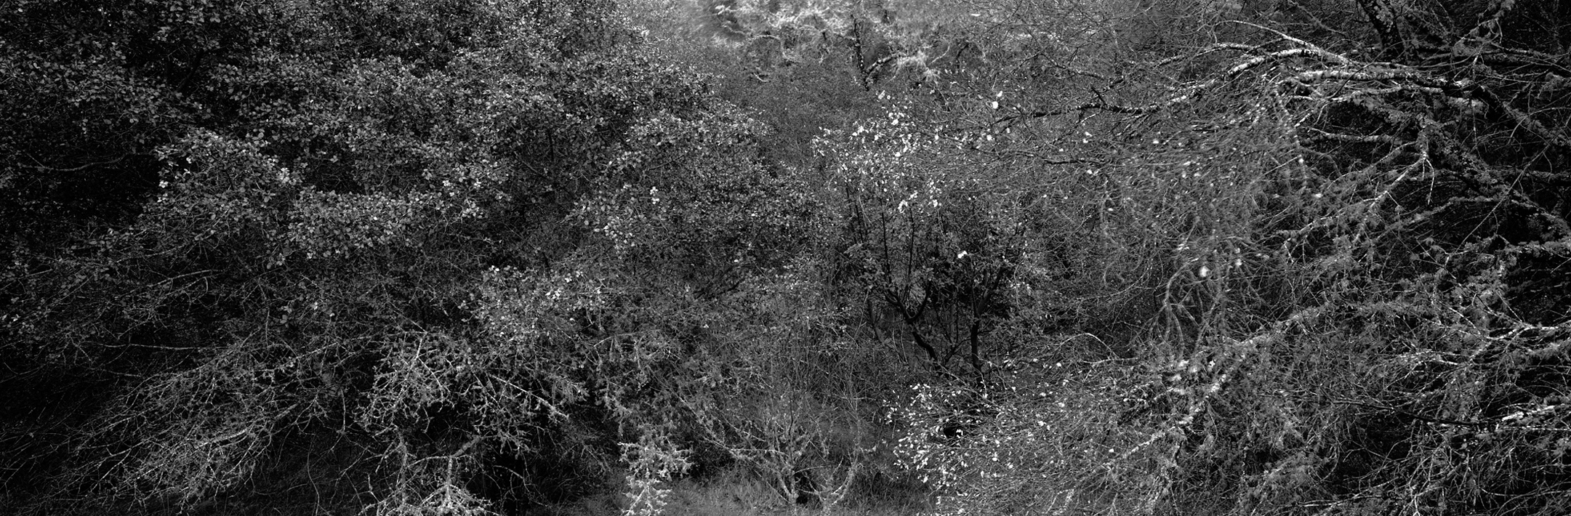 Christian Vogt, Naturräume X, 2008
Pigmented ink on rag paper
110 x 290 cm
Edition of 3